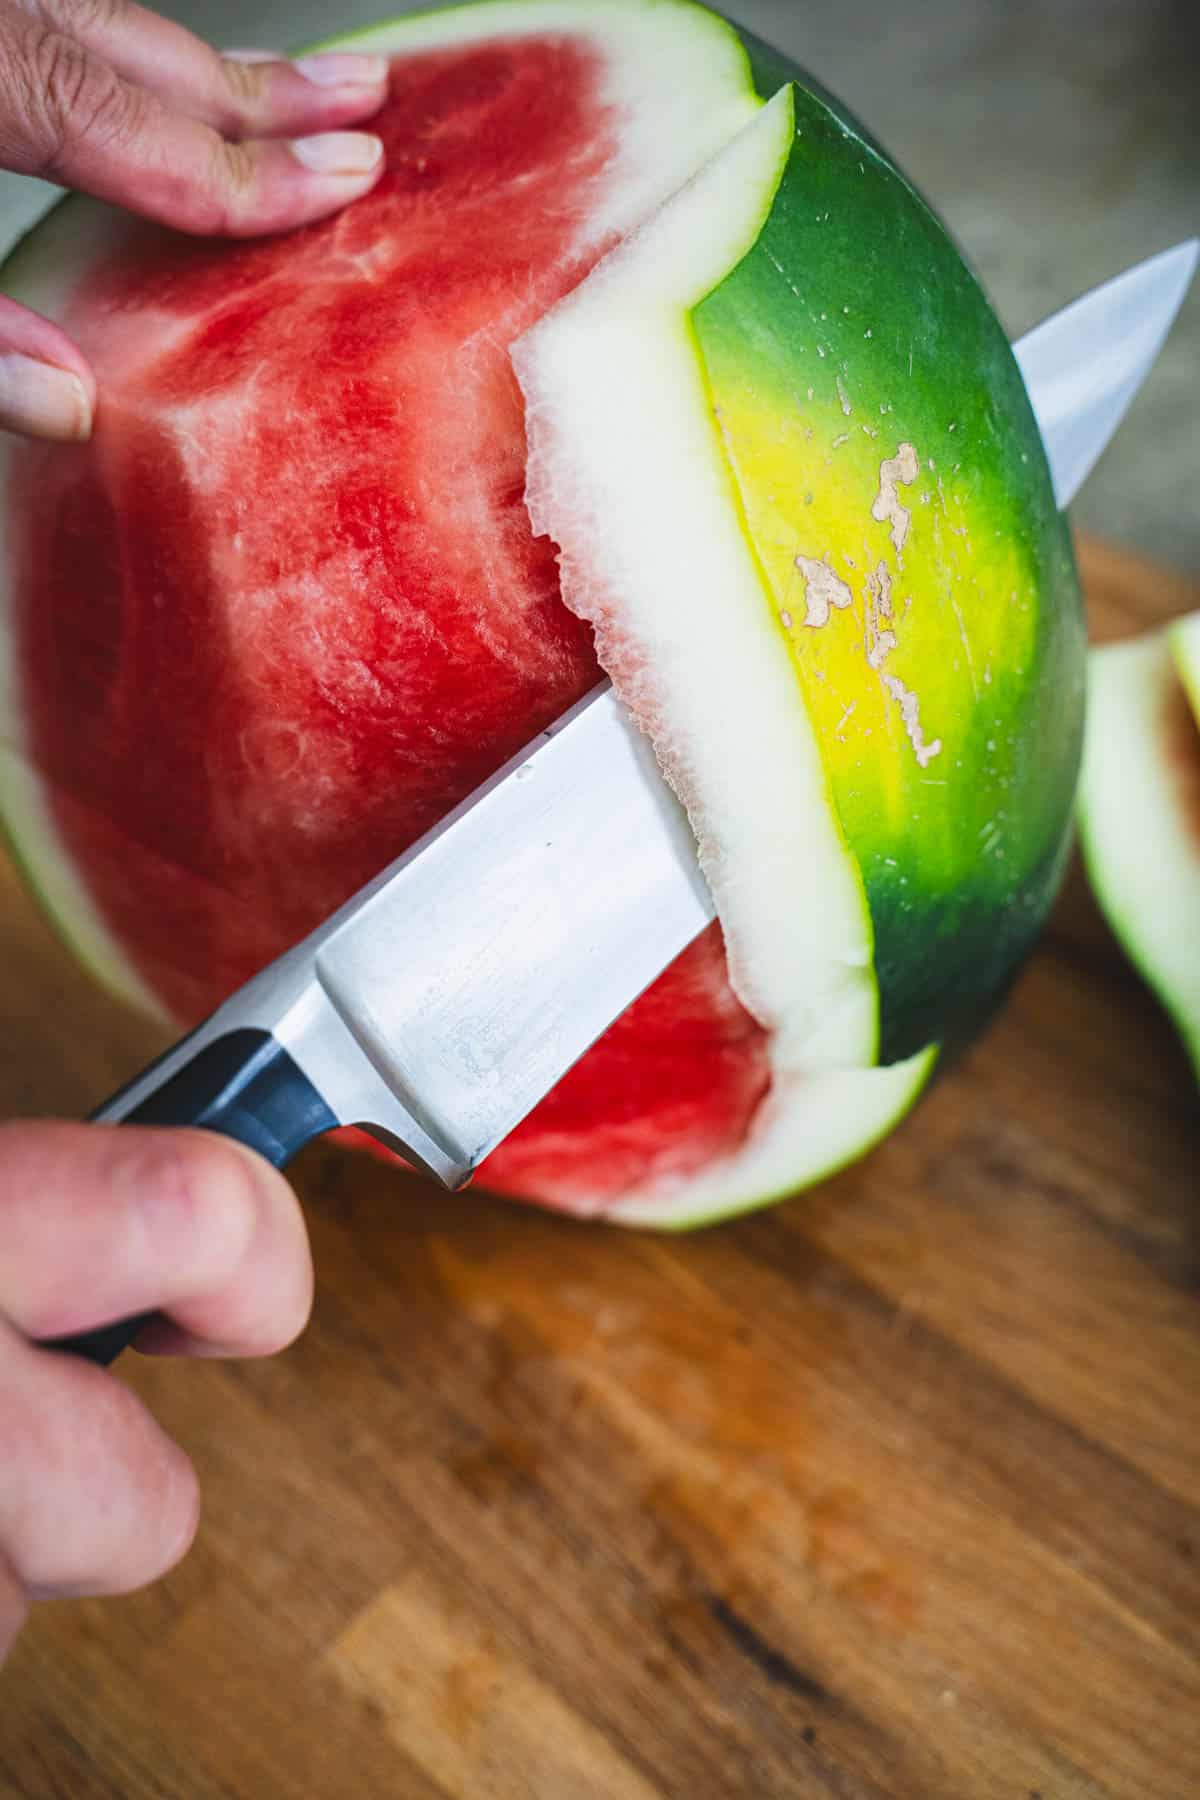 Watermelon on end with one hand holding the melon and one hand holding a chef's knife to remove rind